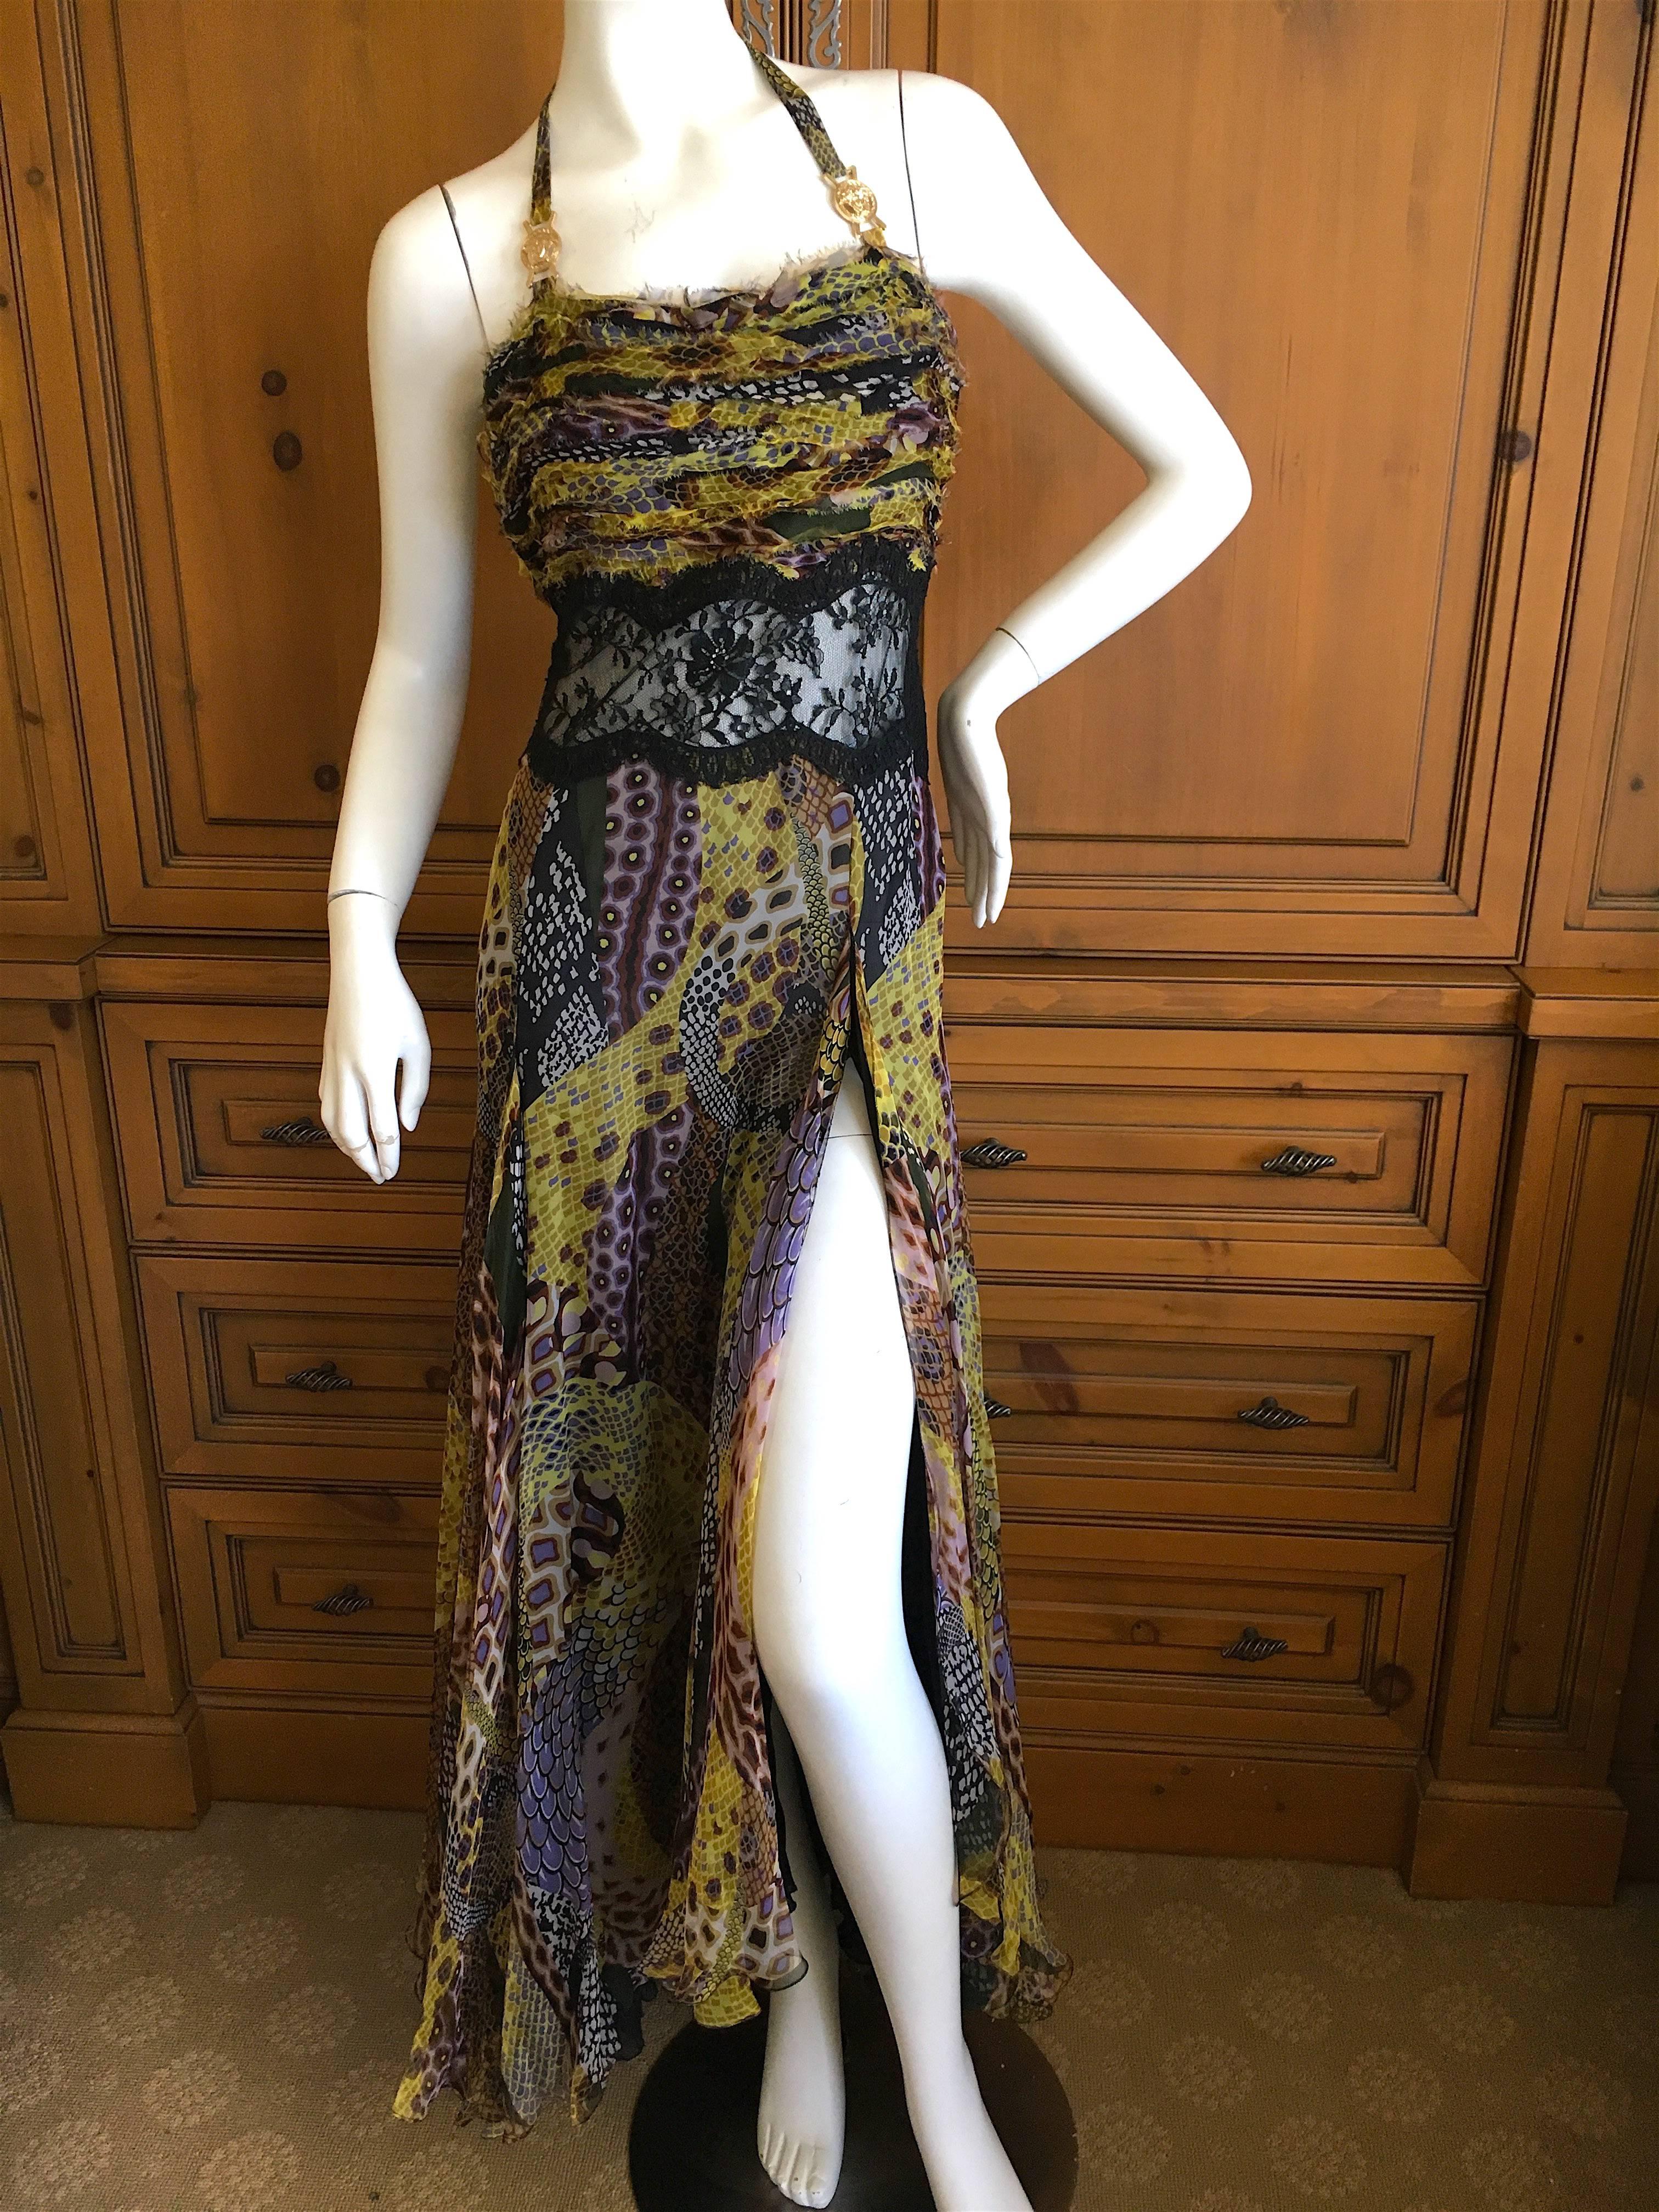 Versace Vintage 90's Snake Print Dress with Sheer Lace and Medusa Ornaments  In Excellent Condition For Sale In Cloverdale, CA